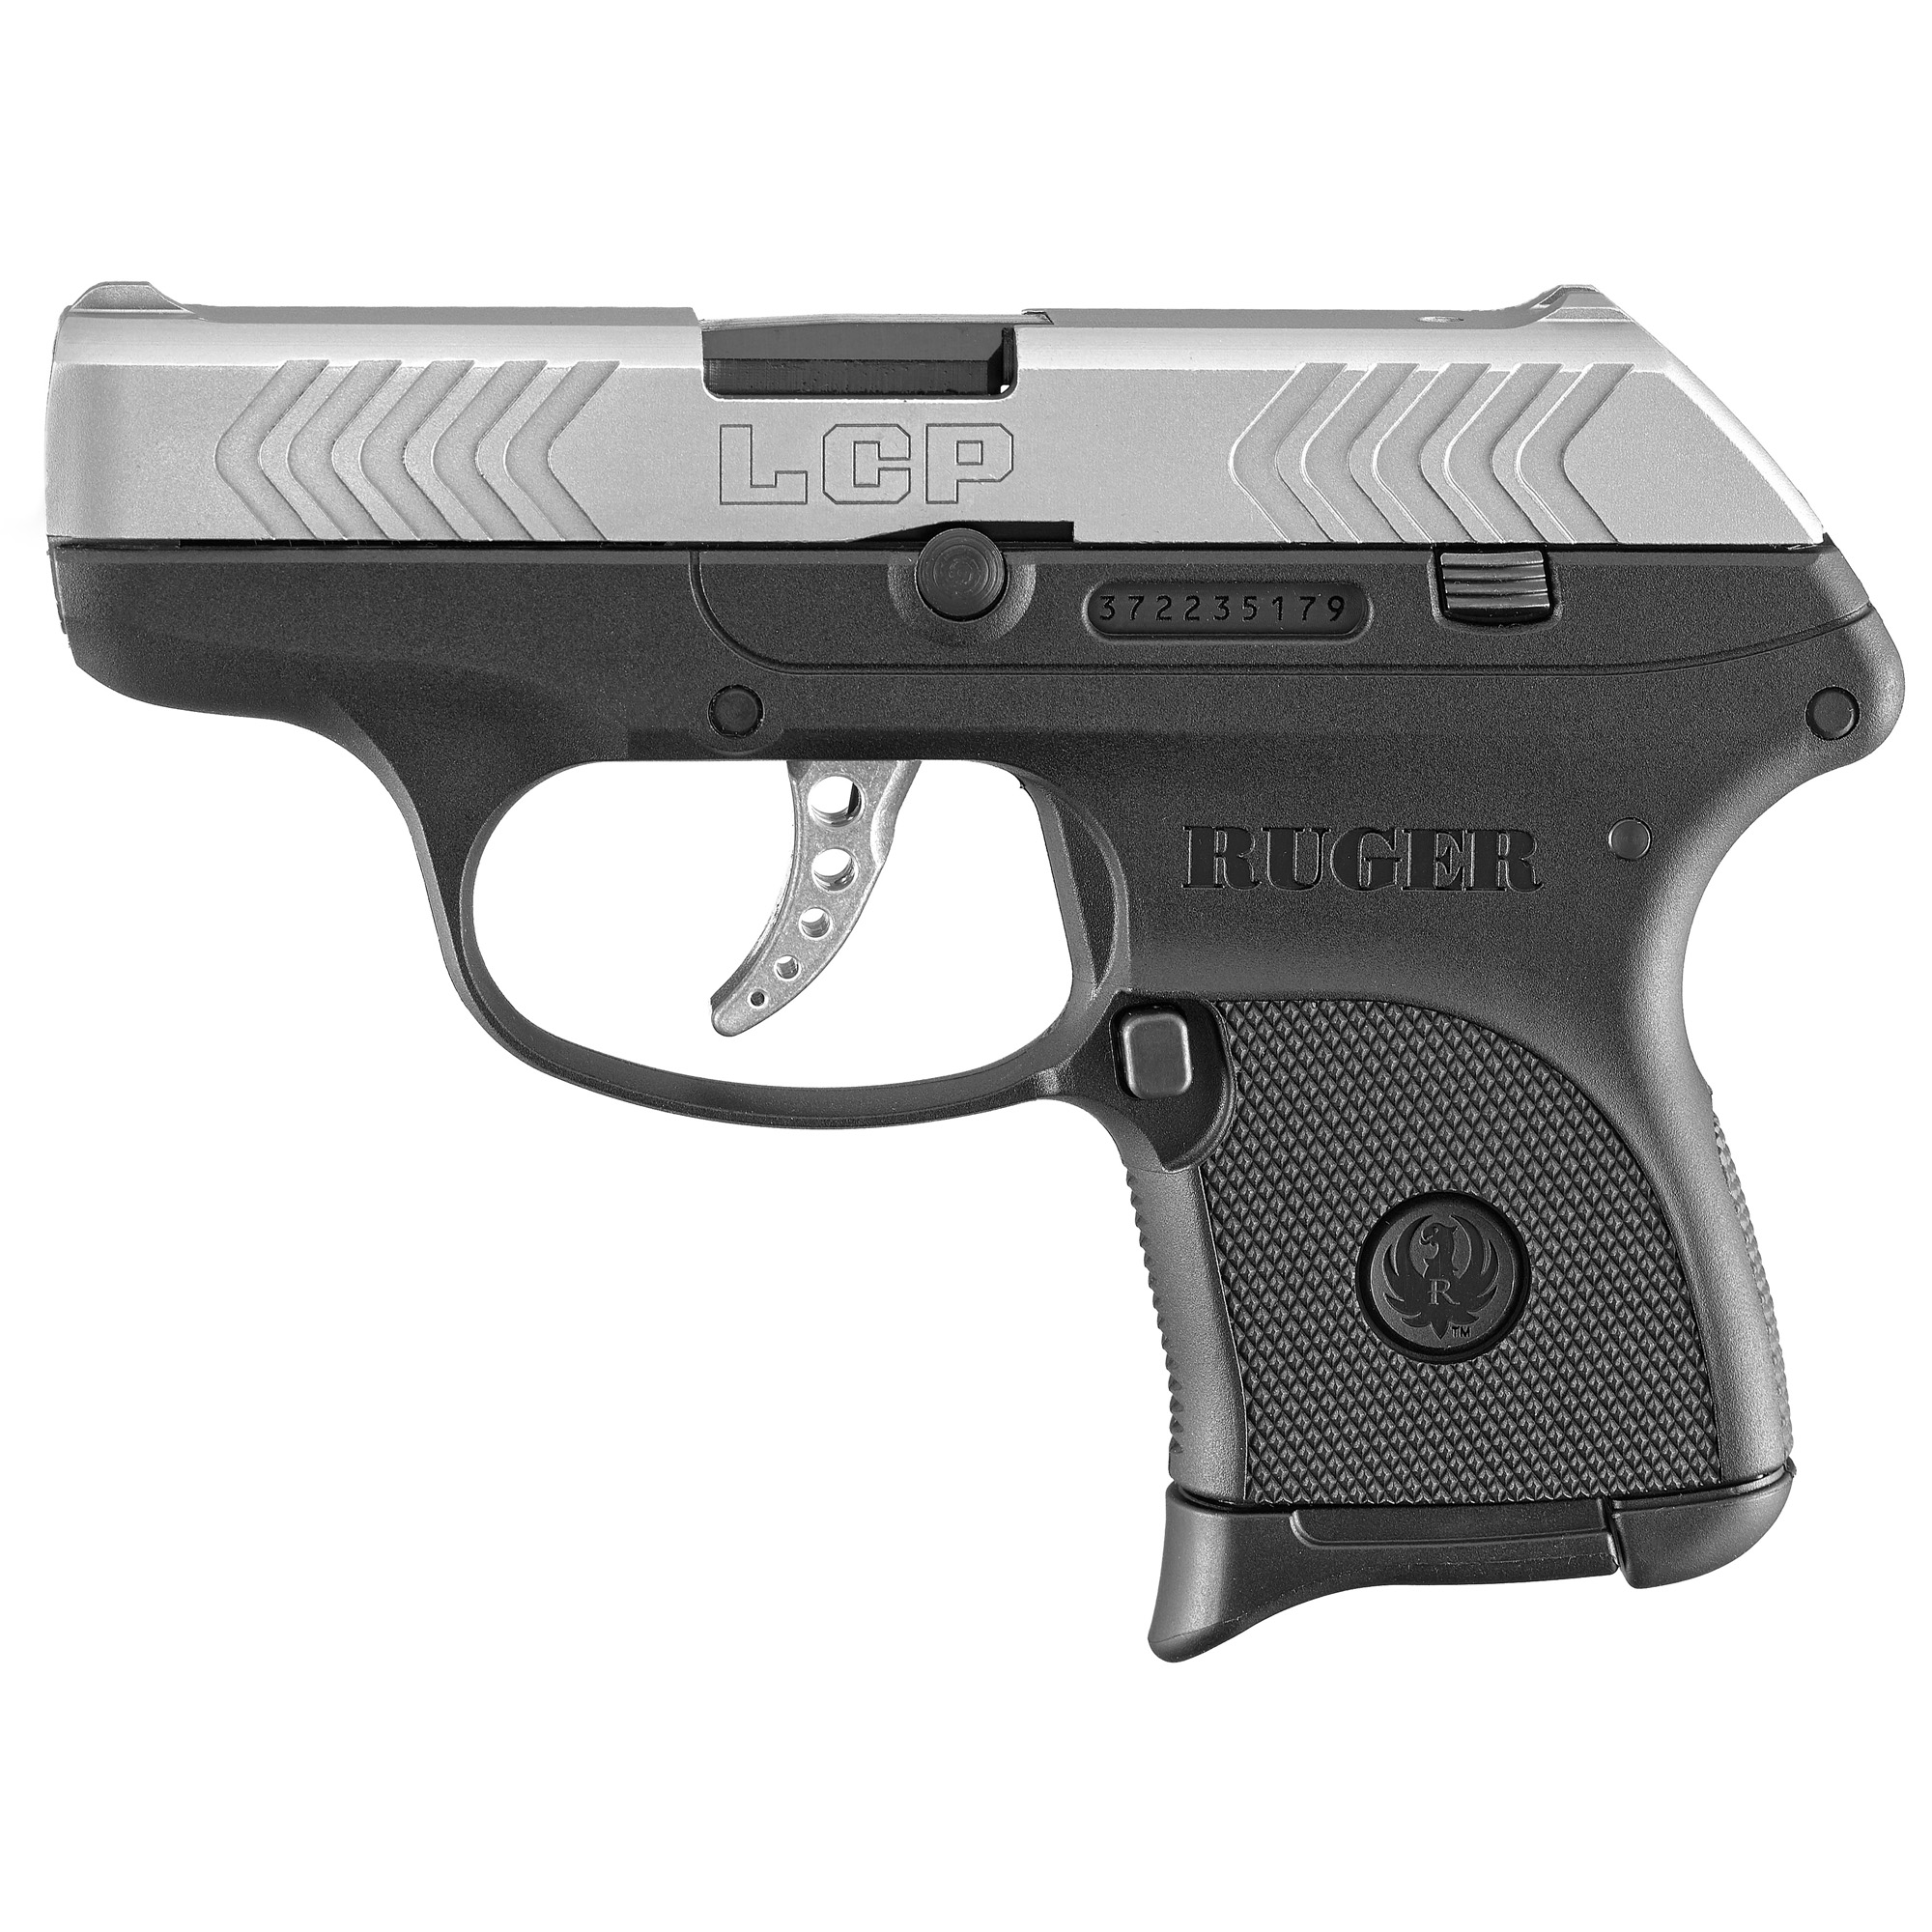 RUGER LCP 380ACP 2.75 BLK/SS 6RD